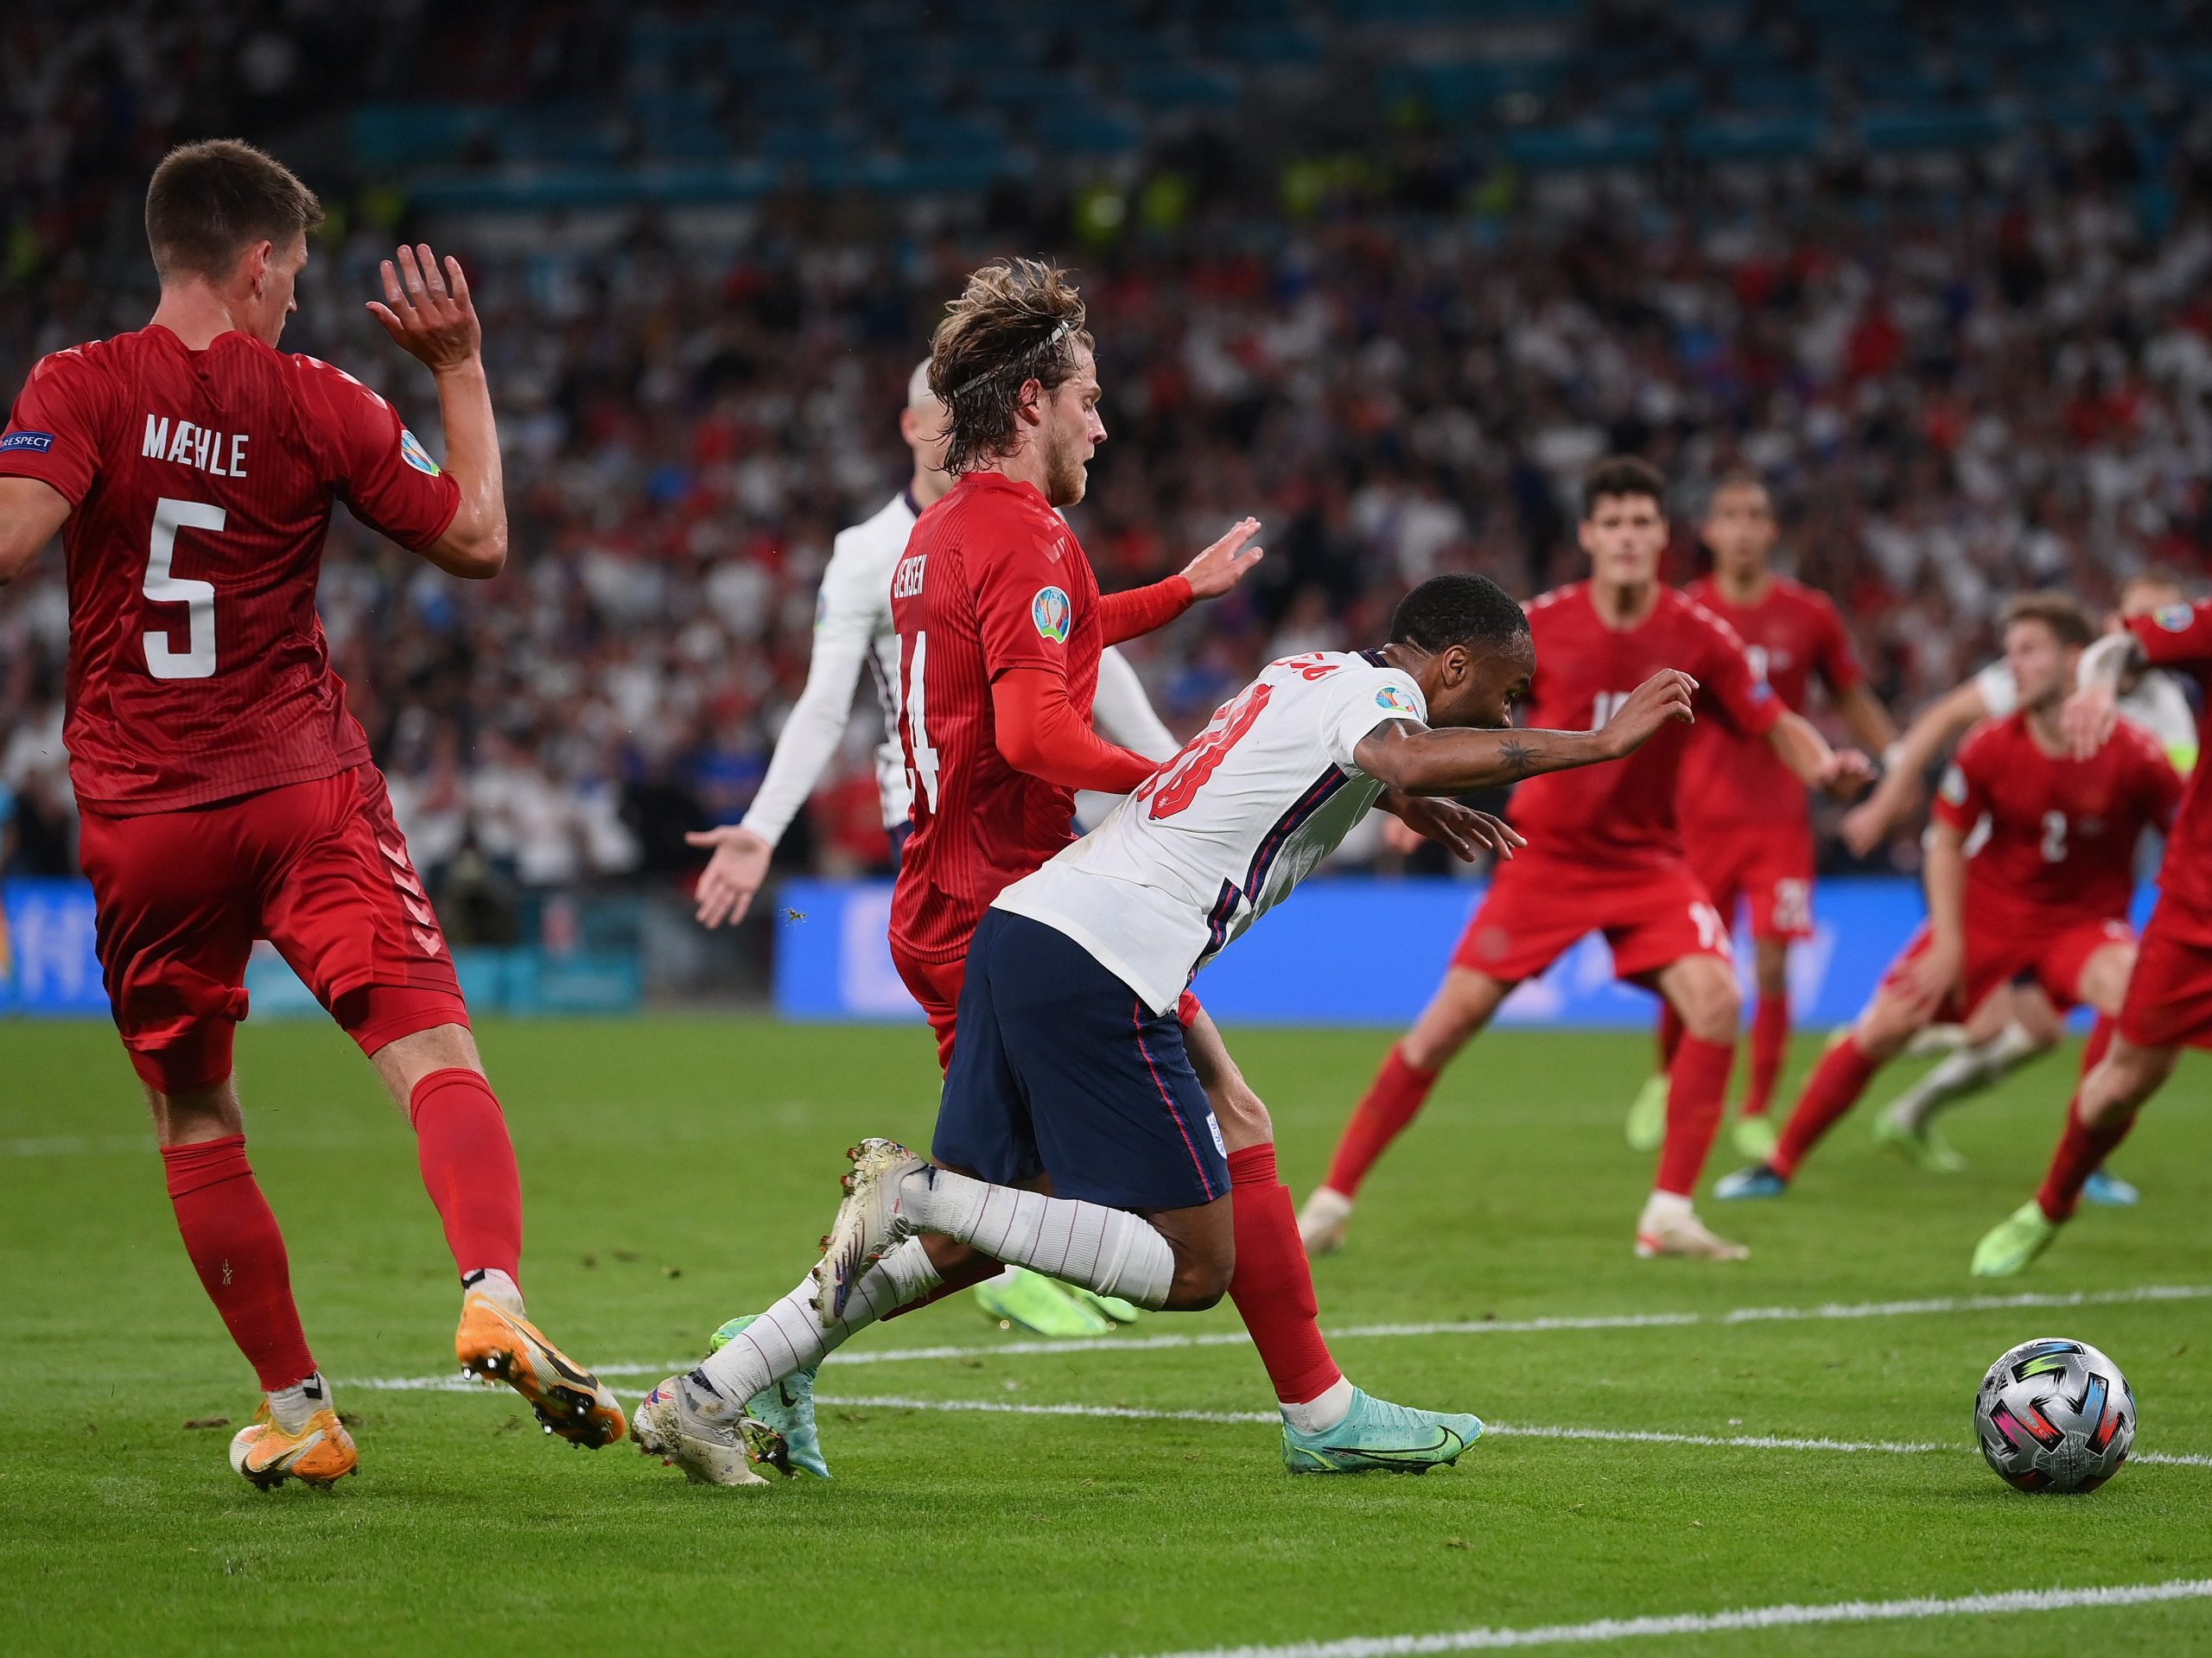 Raheem Sterling is fouled by Mathias Jensenduring the UEFA Euro 2020 Championship Semi-final match between England and Denmark